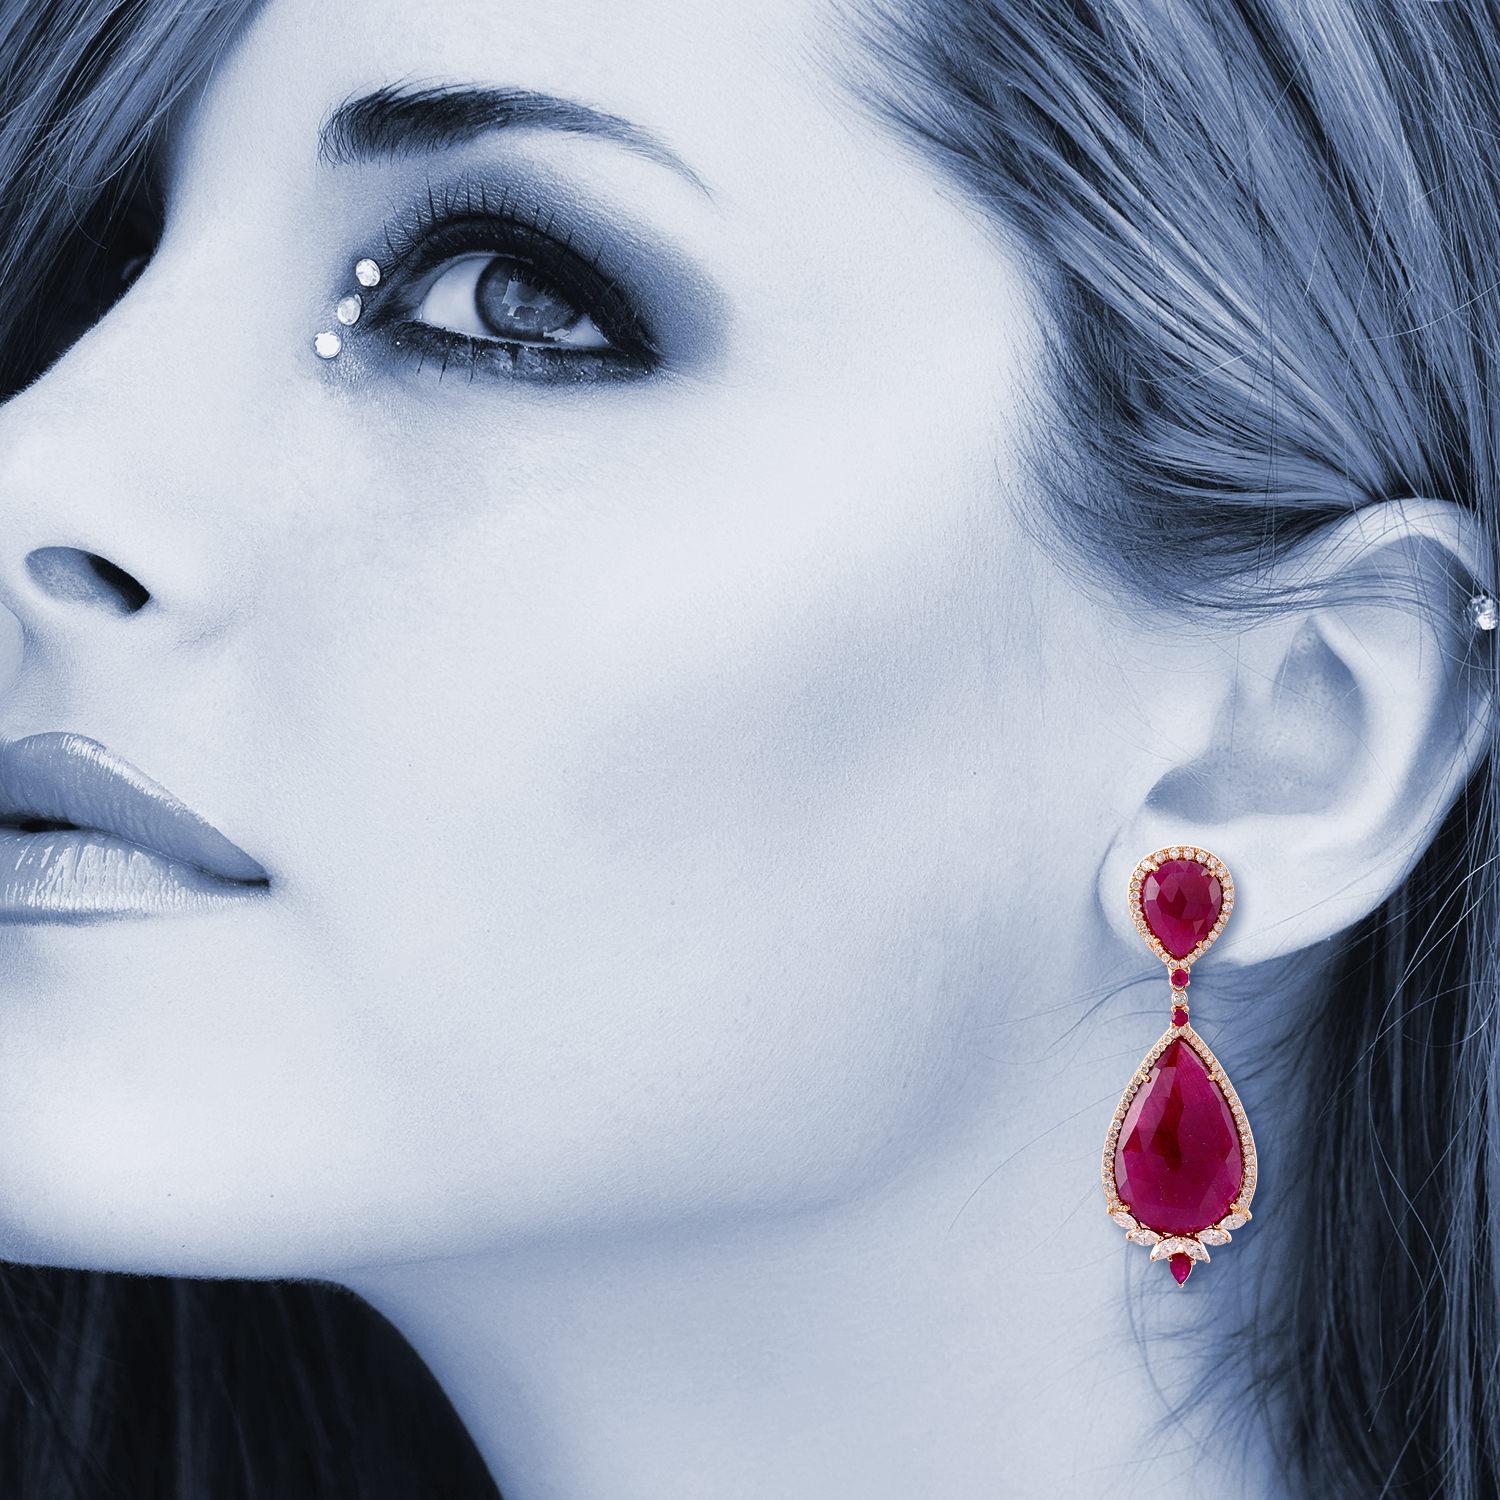 Cast in 18 karat gold. These beautiful earrings are hand set in 49.67 carats rubies & 2.1 carats of sparkling diamonds.

FOLLOW  MEGHNA JEWELS storefront to view the latest collection & exclusive pieces.  Meghna Jewels is proudly rated as a Top